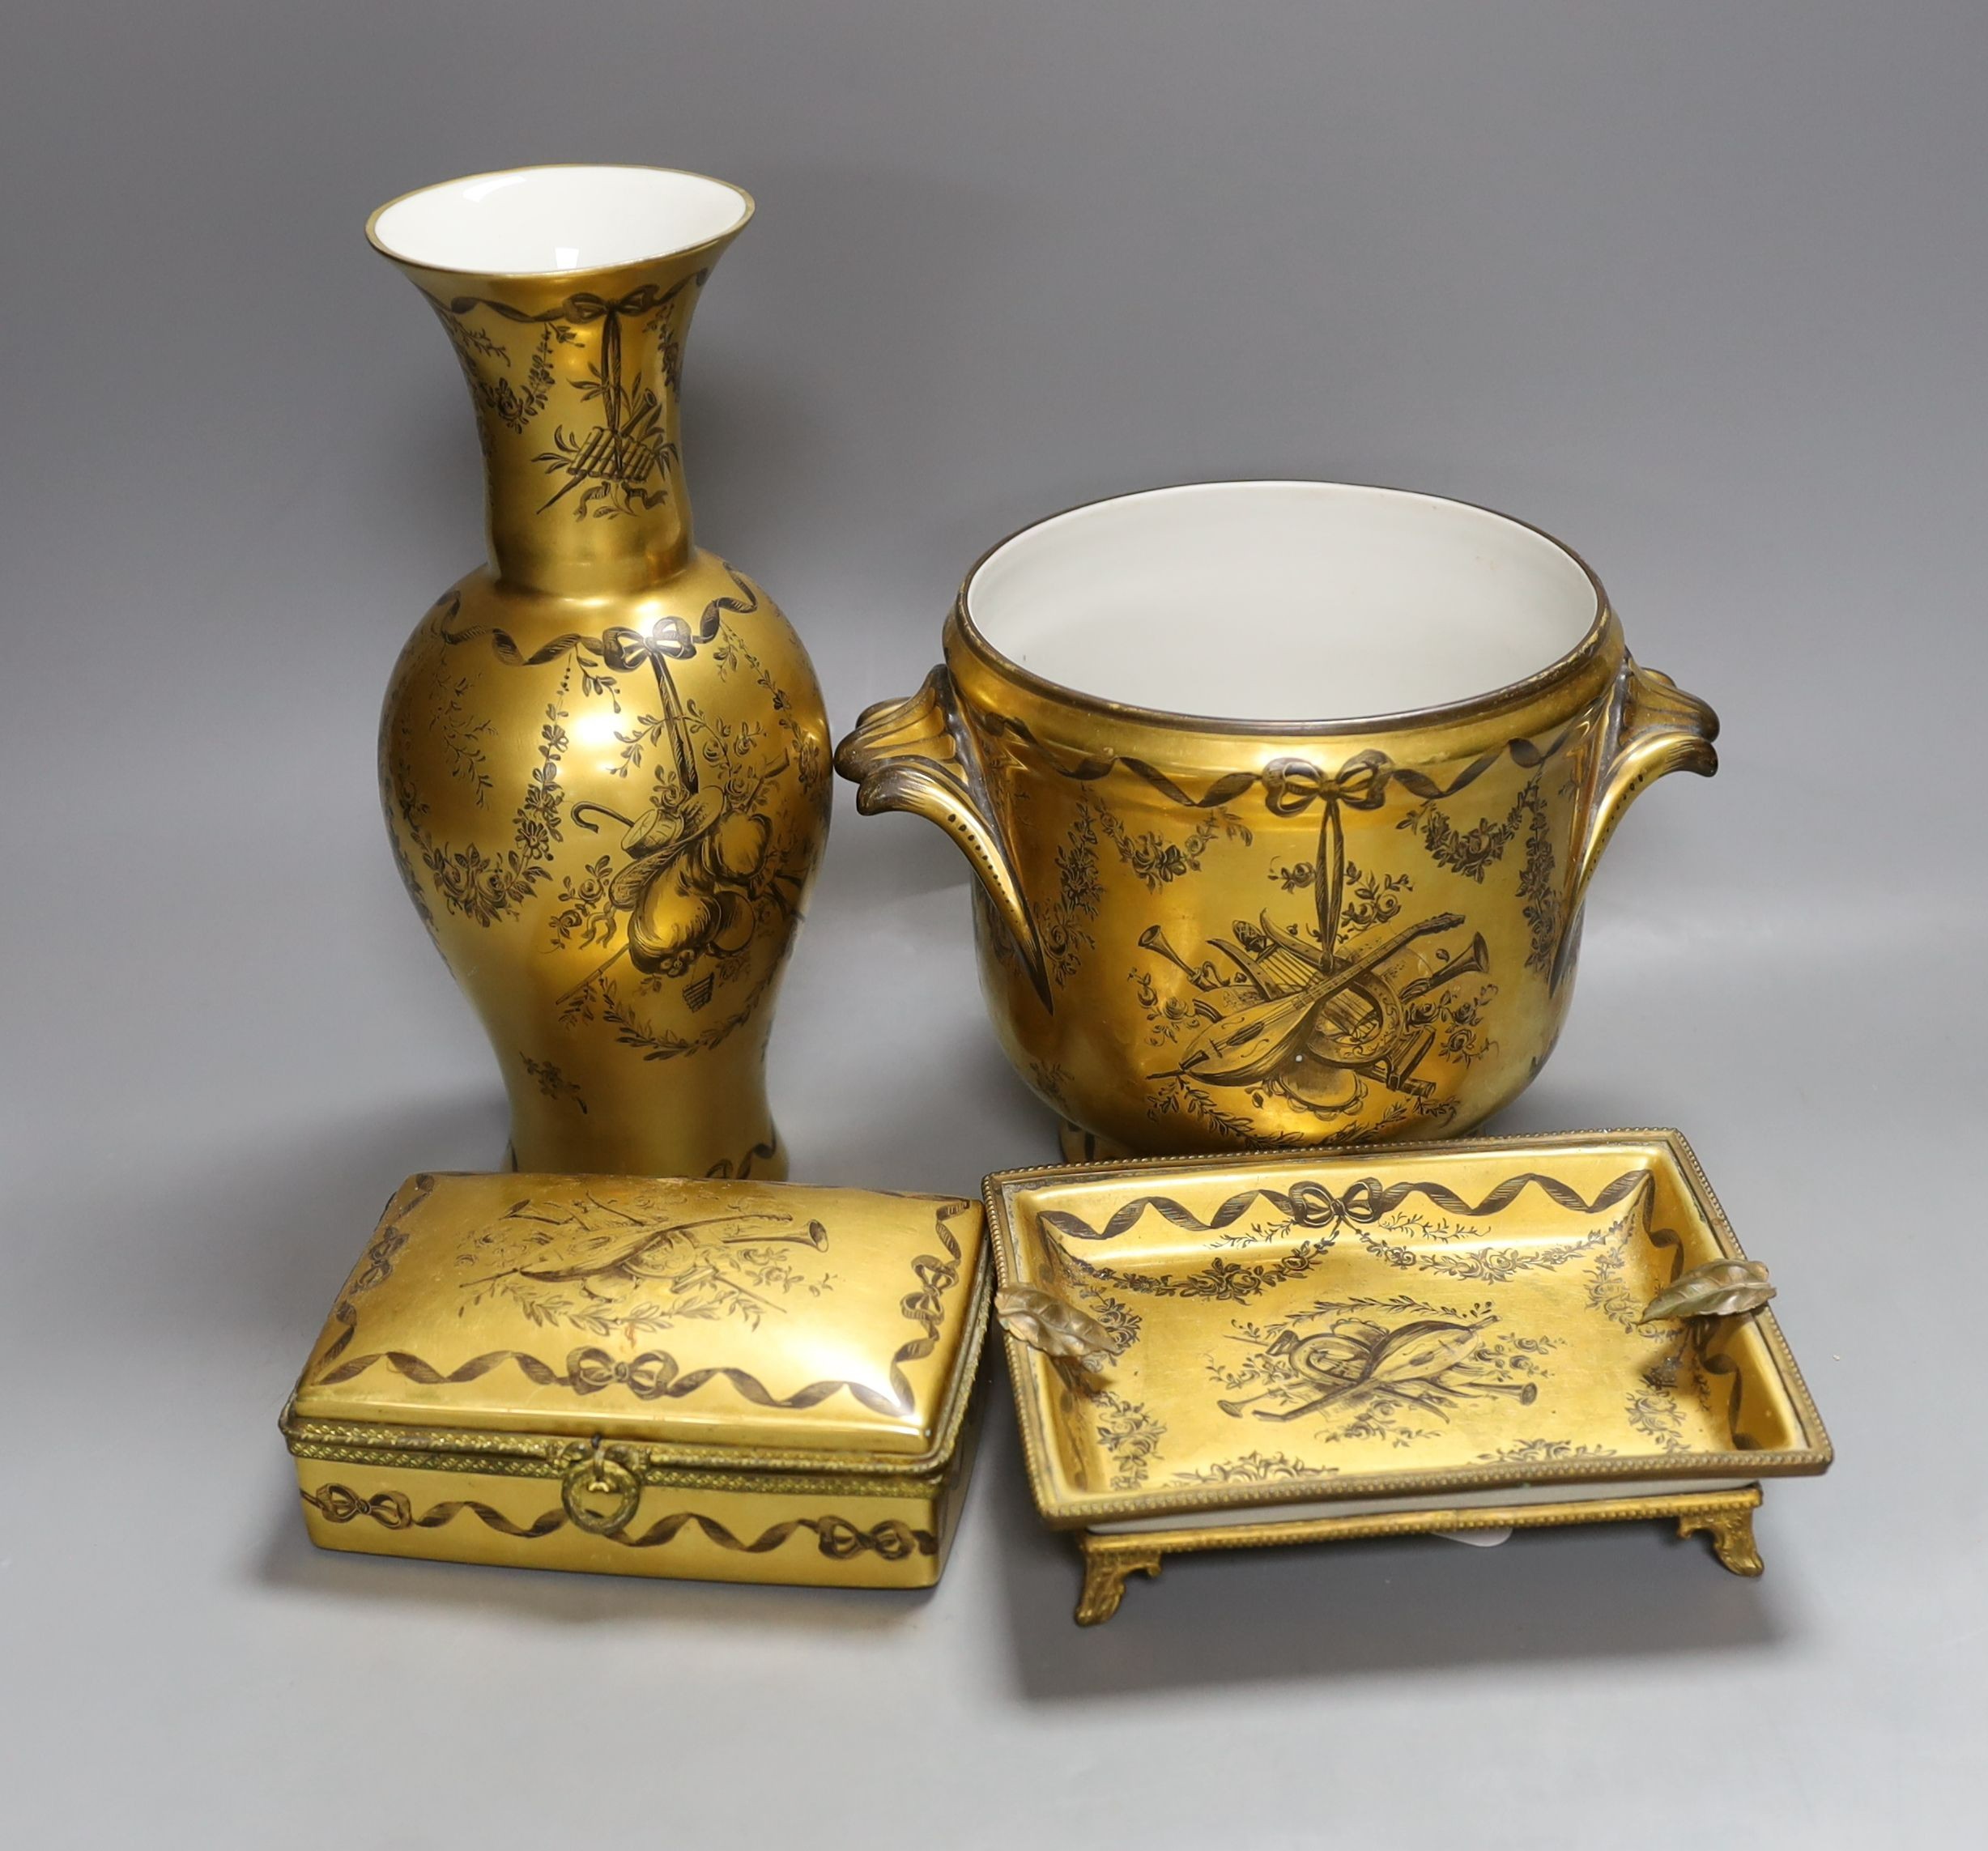 A French gilt ground porcelain cache pot, together with a matching box, ashtray and a vase - tallest 24cm